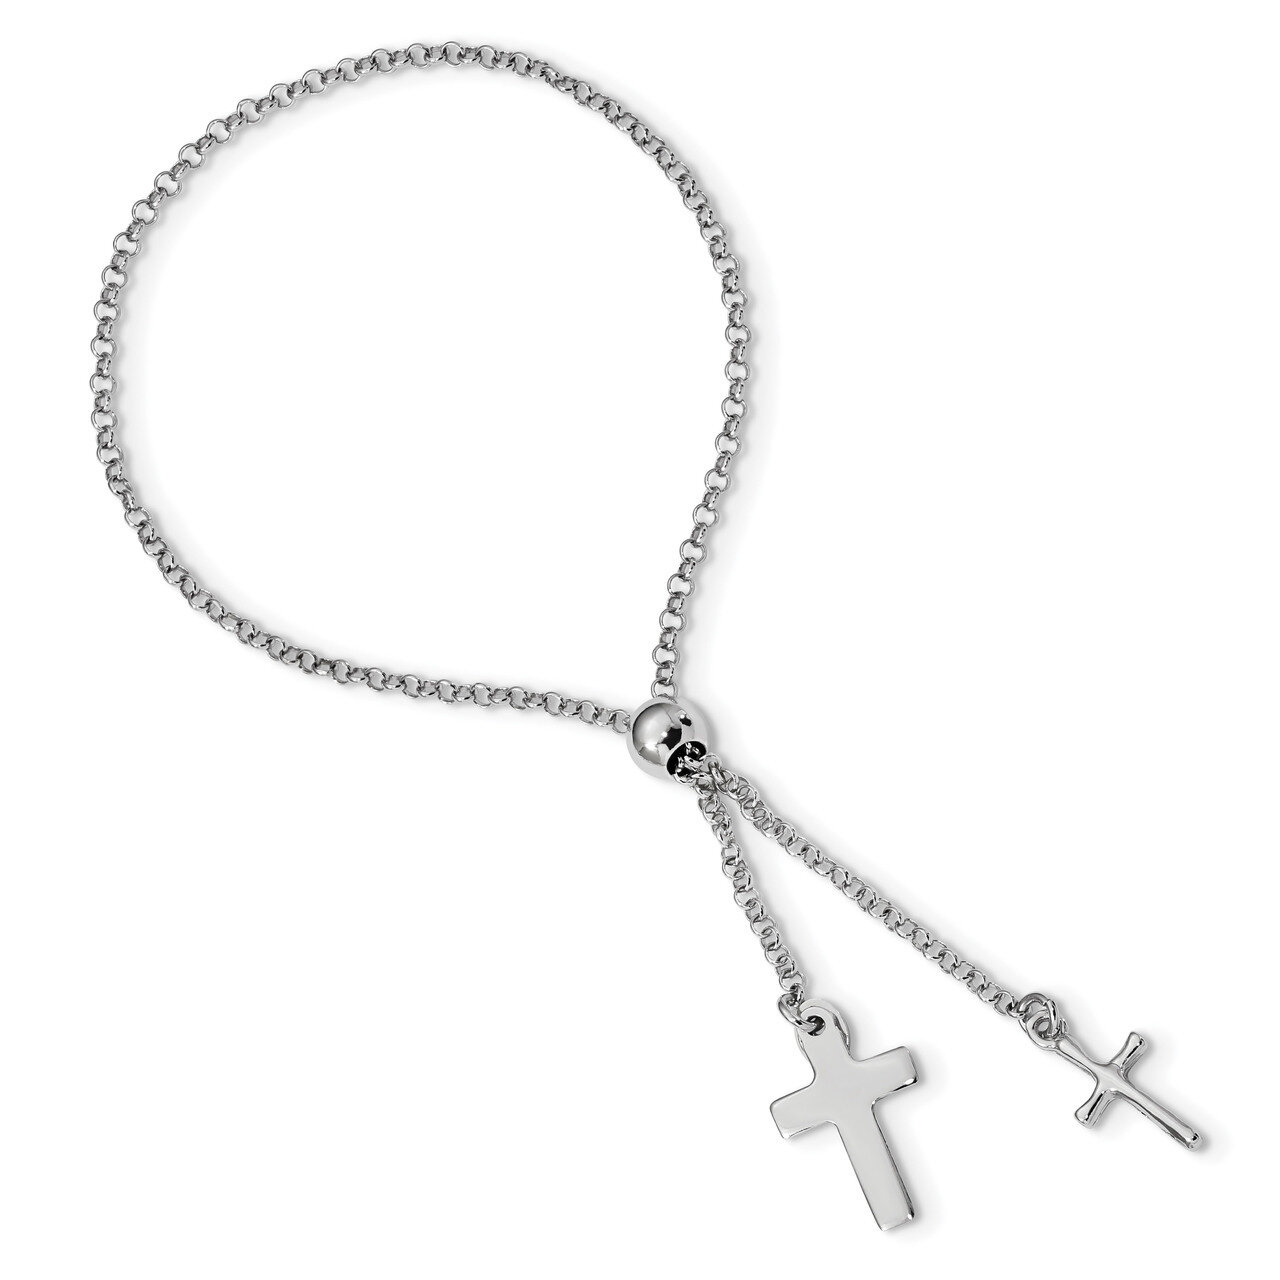 Cross Adjustable 5in to 8.75in Bracelet 9 Inch Sterling Silver Rhodium-plated QG4564